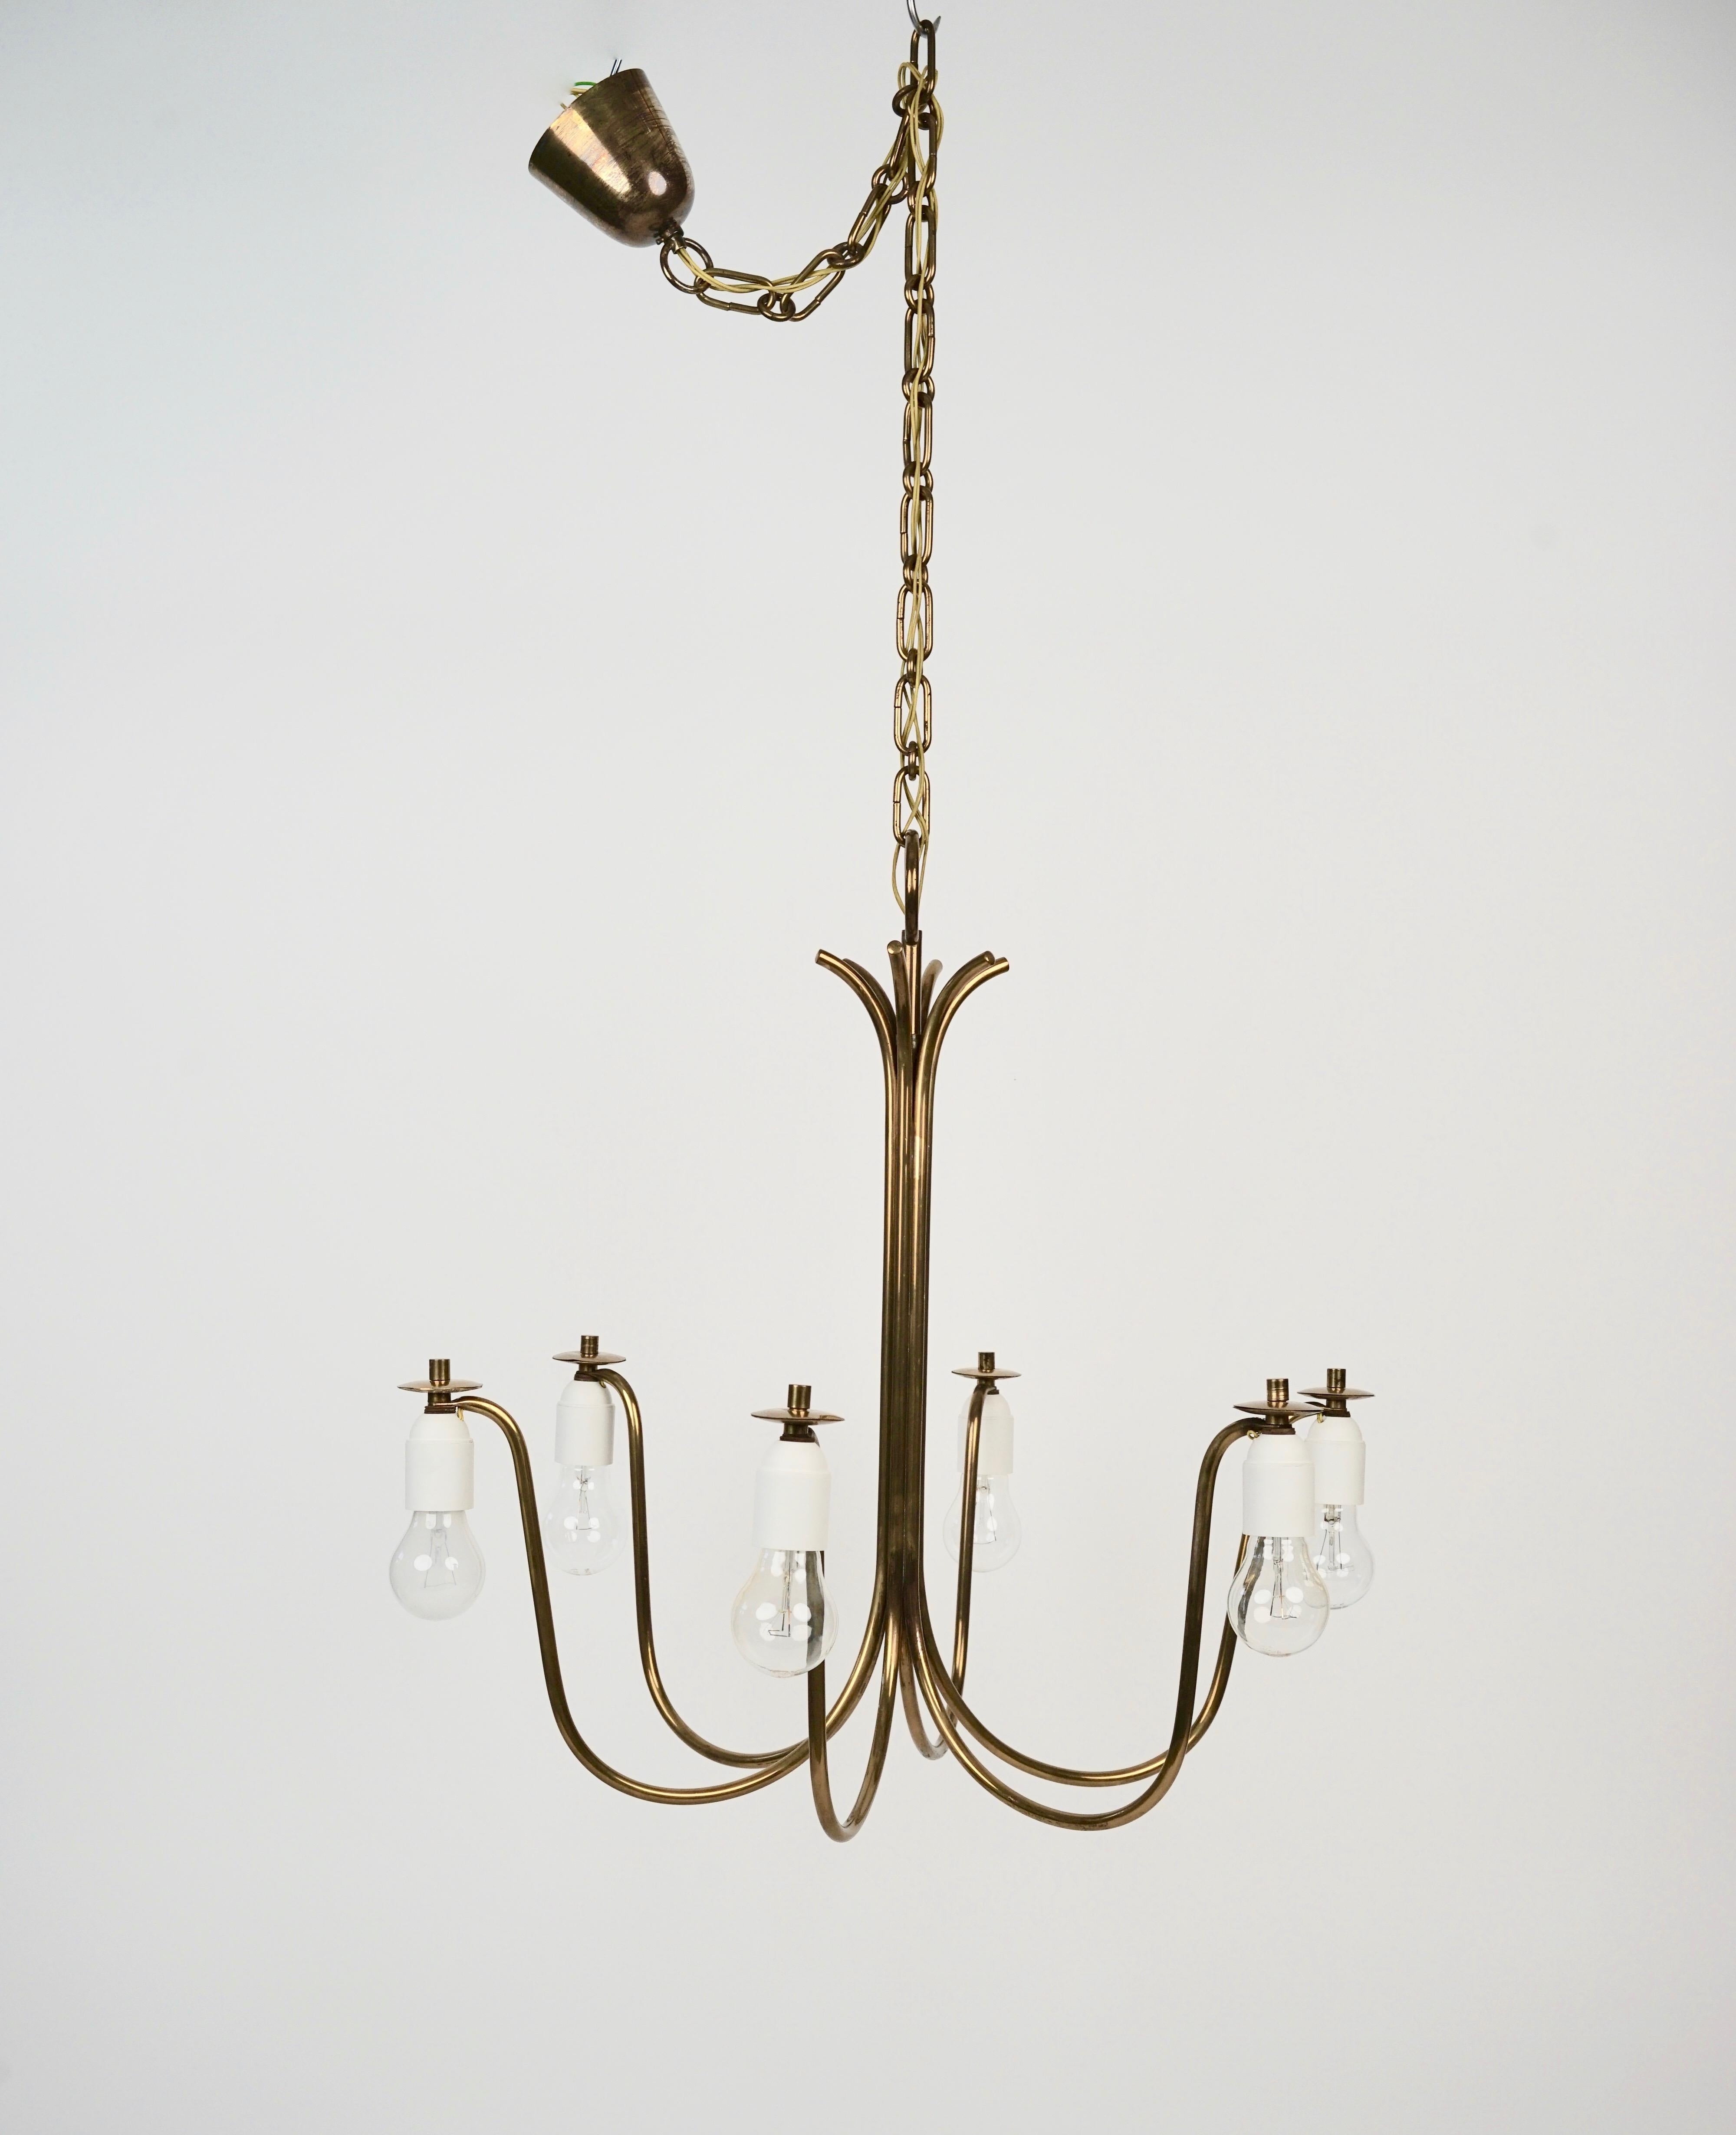 Large chandilier in brass with six arms, designed by Josef Frank in the 1950 ' s, Austria.
The silk shades in cream use the original metal construction. The electric has been controlled and has new sockets.